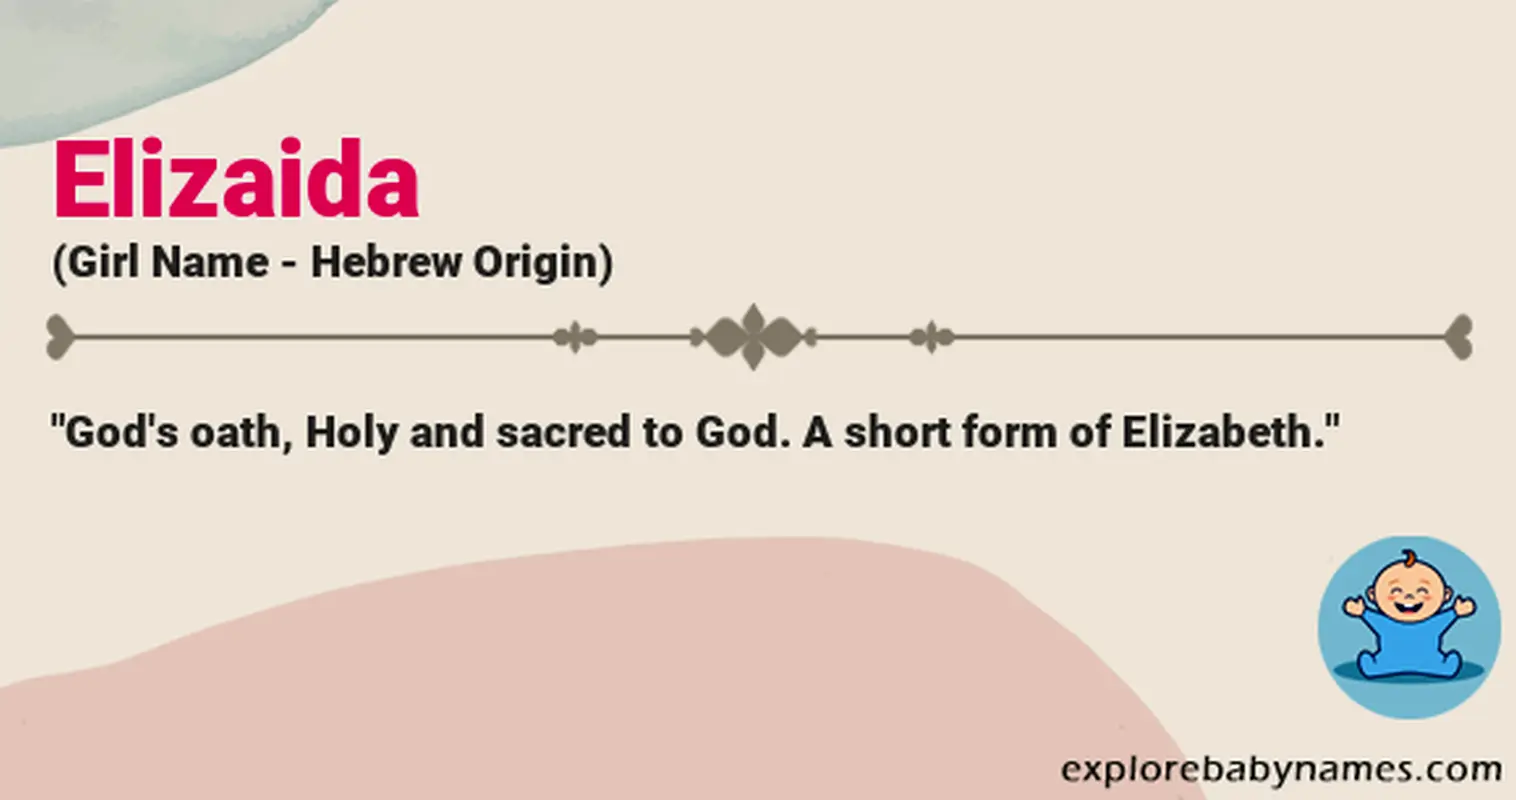 Meaning of Elizaida